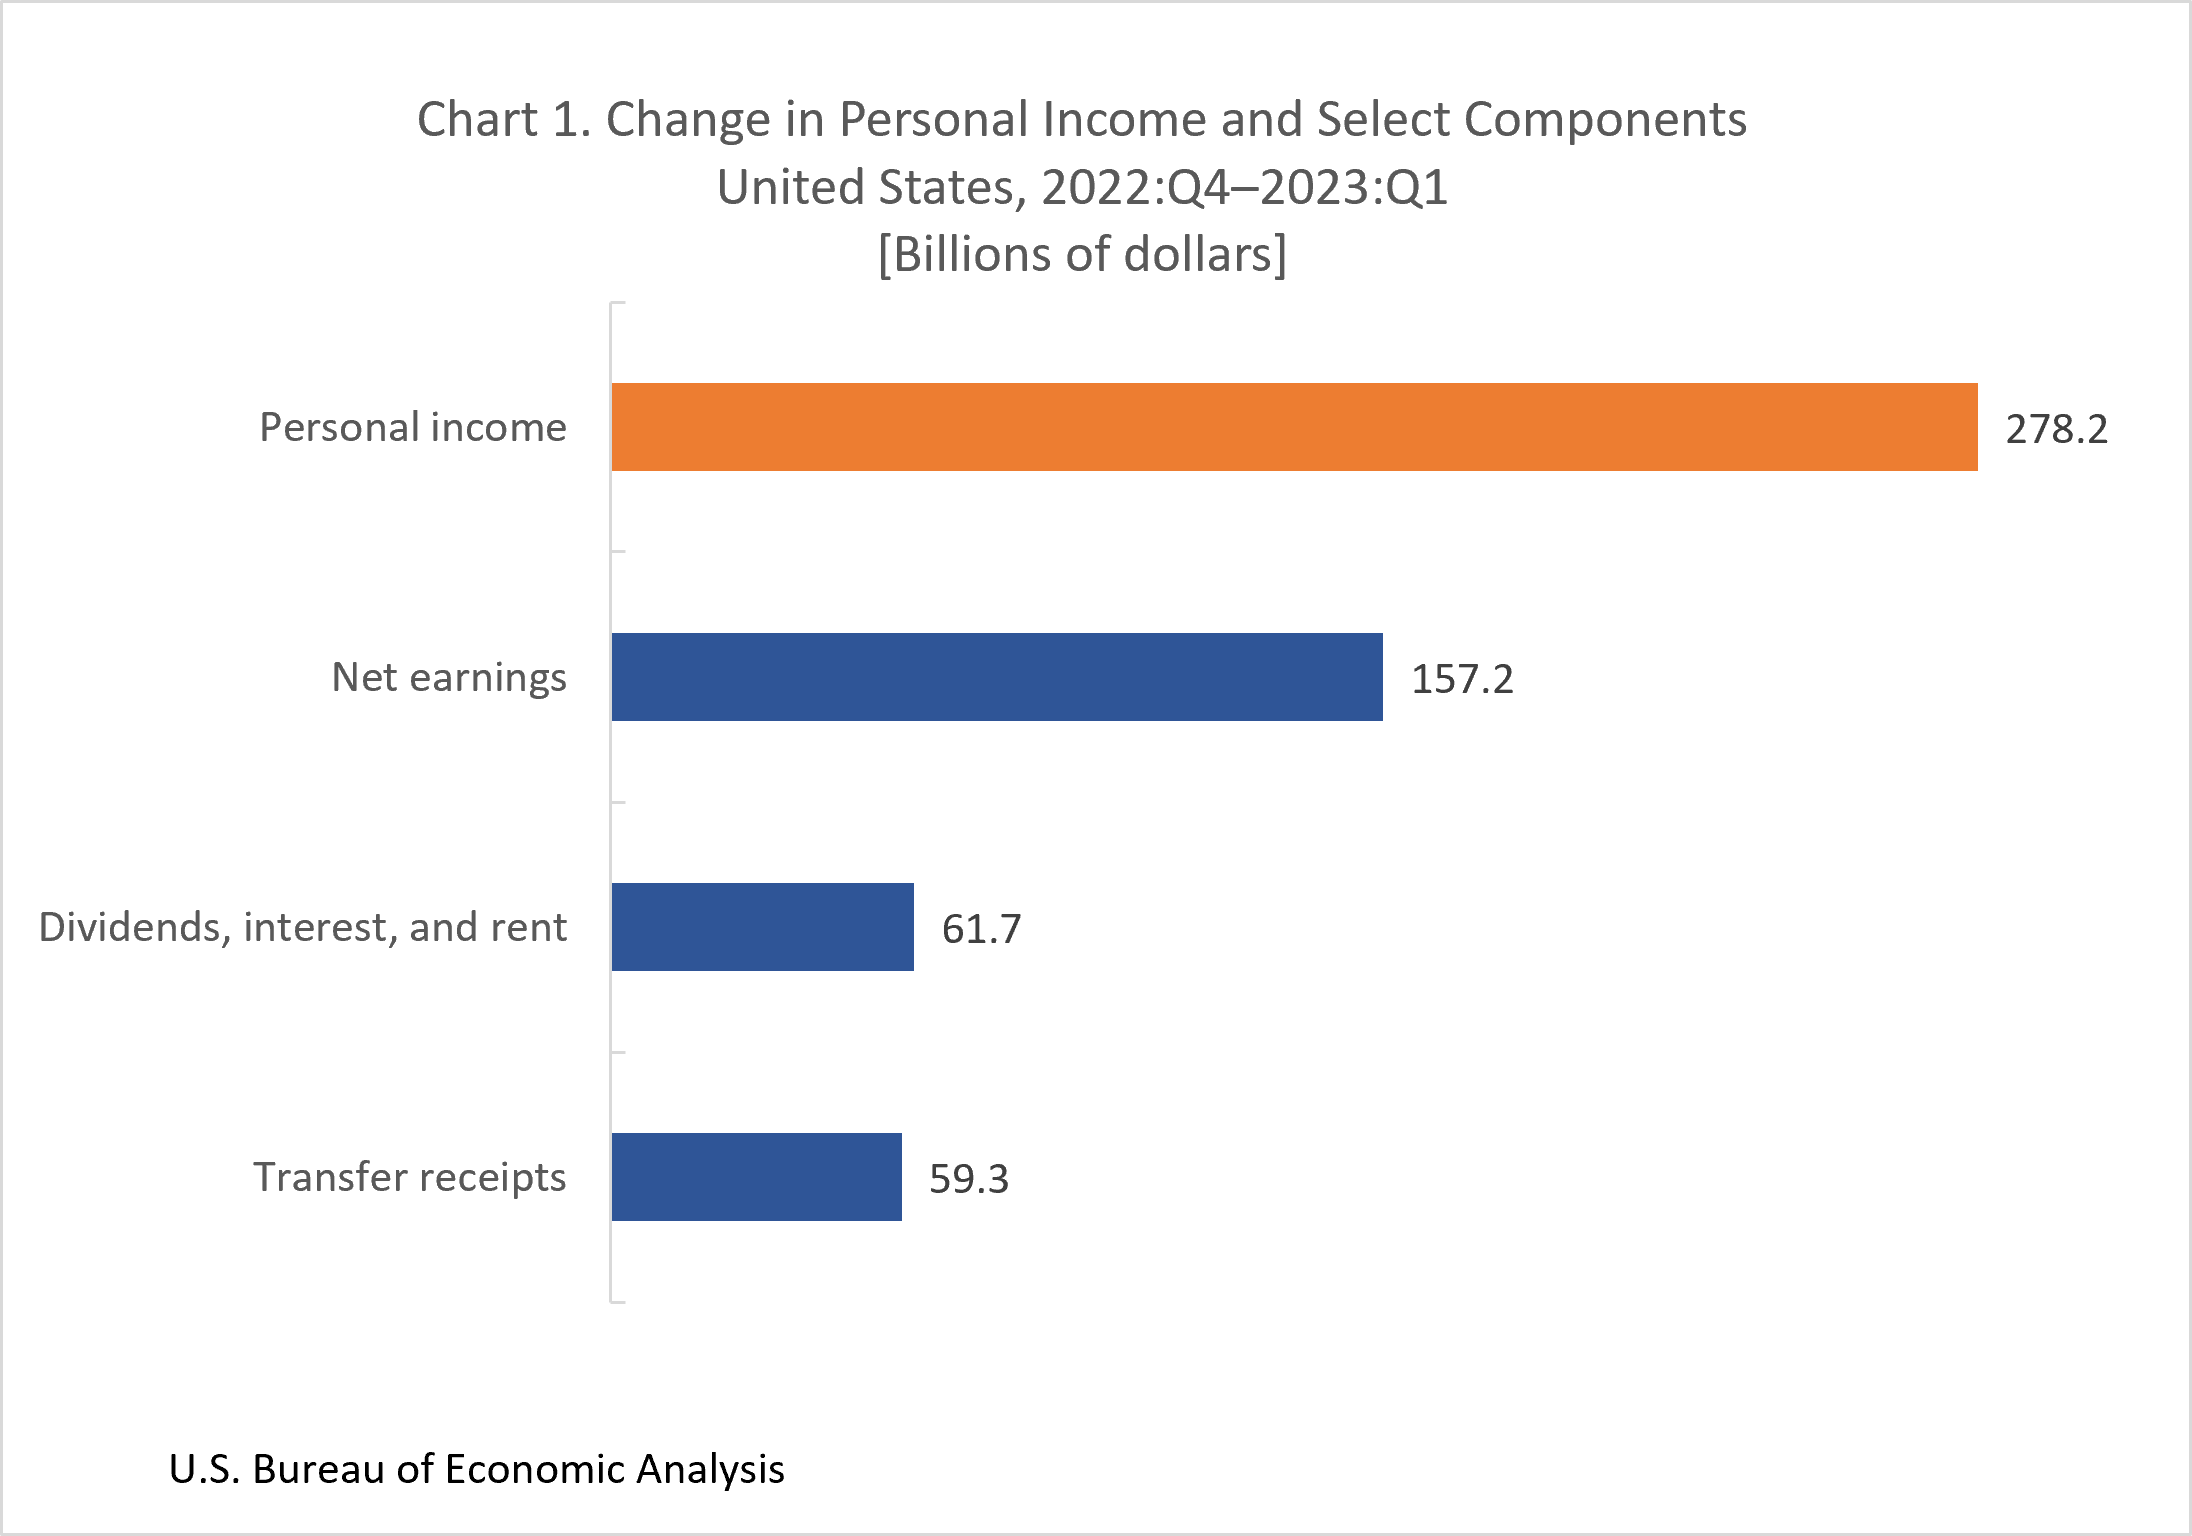 Chart 1: Change in Personal Income and Select Components United States, 2022:Q4-2023:Q1